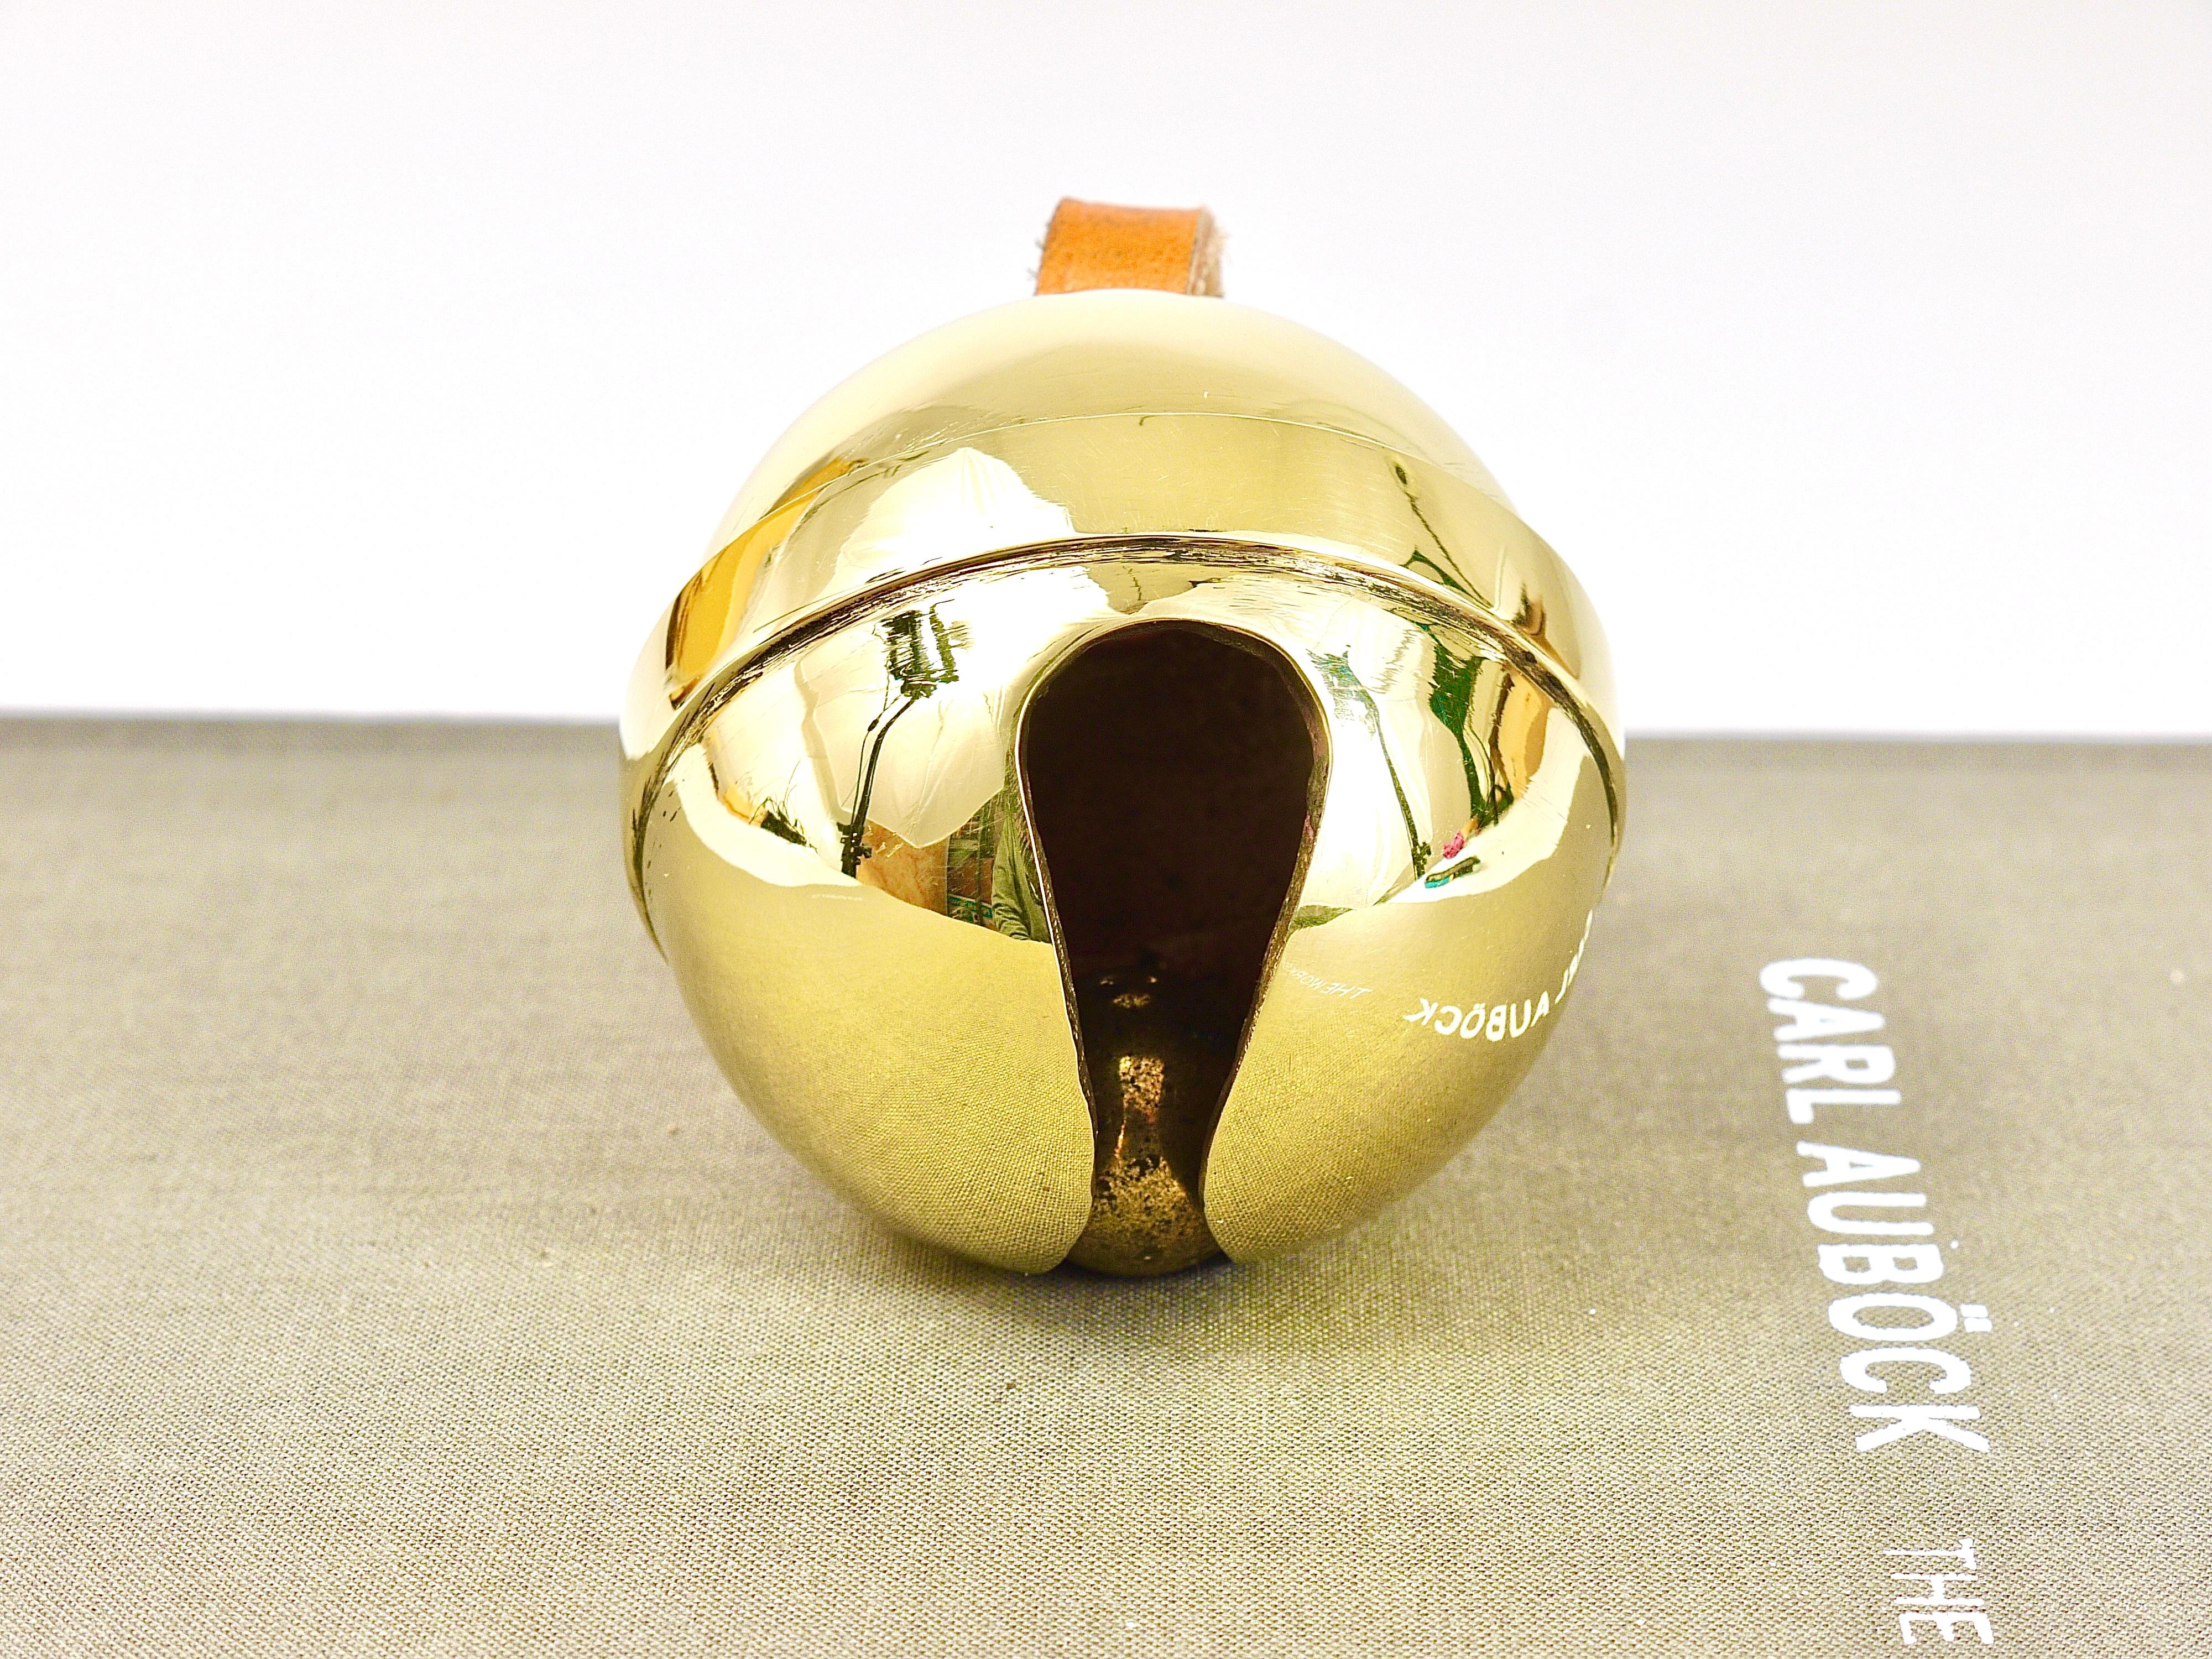 Carl Auböck Handcrafted Paperweight Jingle Bell #5039, Brass, Leather, Austria In Excellent Condition For Sale In Vienna, AT